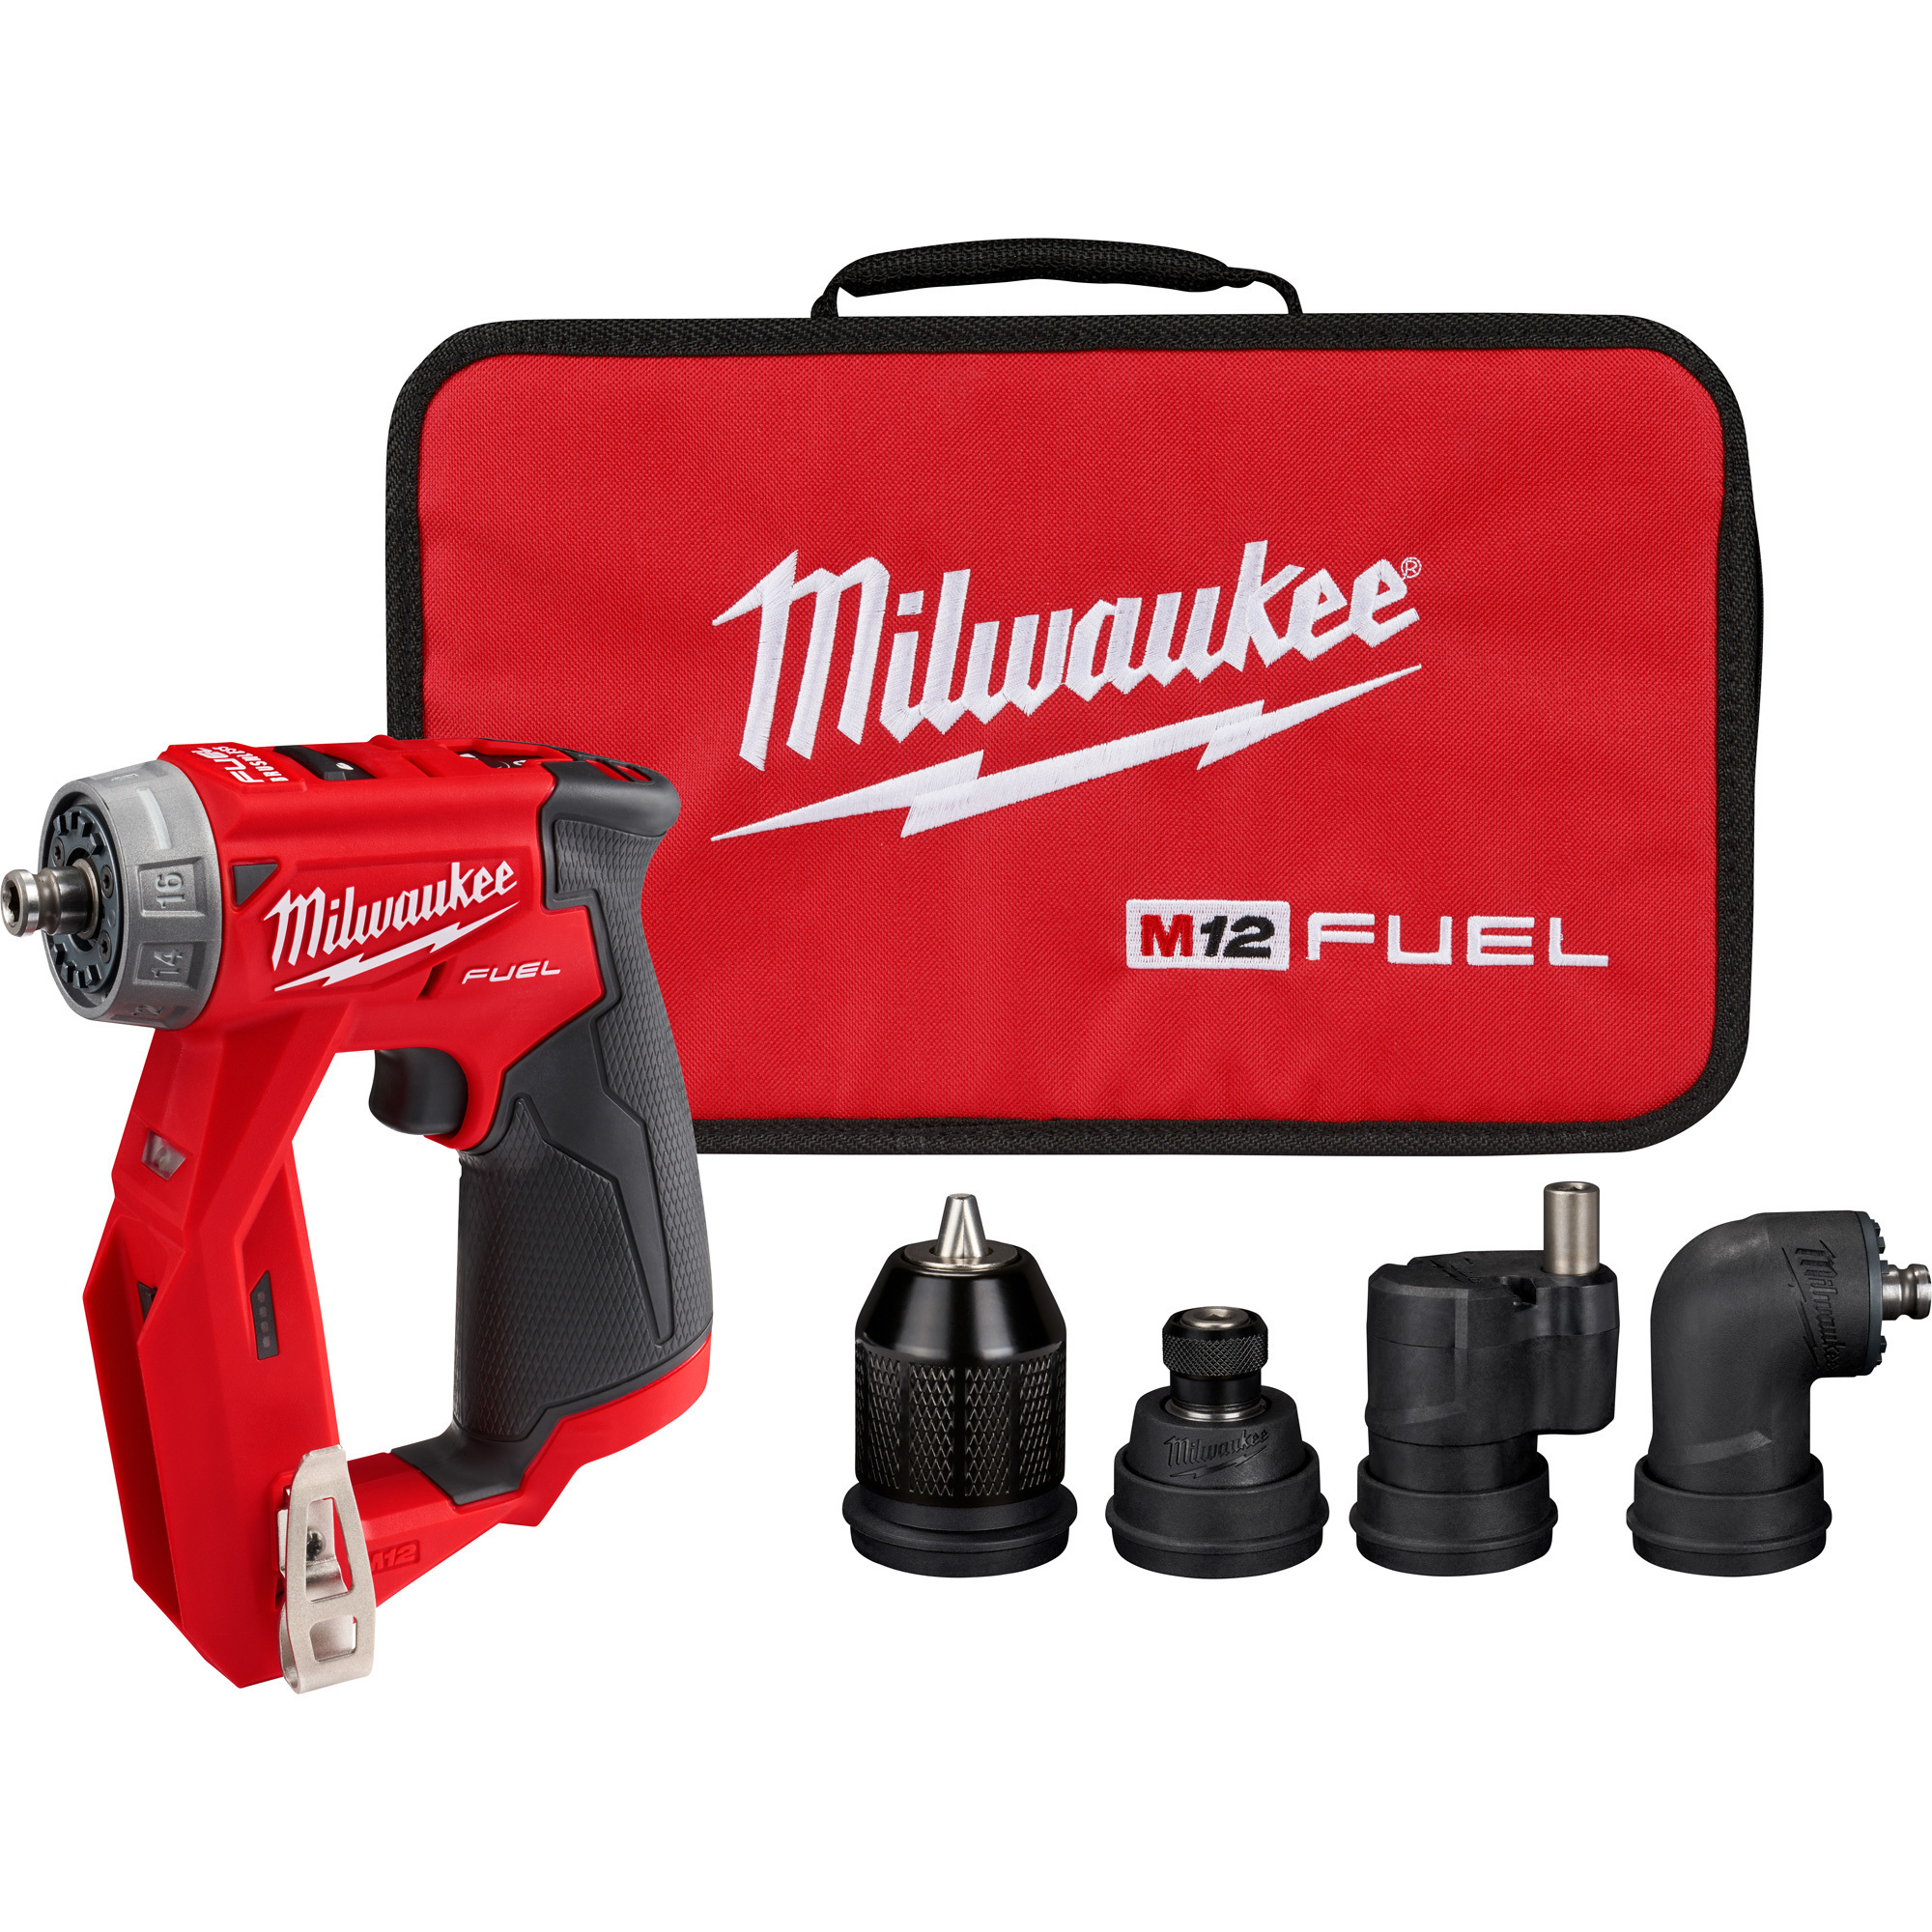 M12 FUEL Installation Drill/Driver — Tool Only, 300 Inch/Lbs. Torque, 1600 RPM, Model - Milwaukee 2505-20